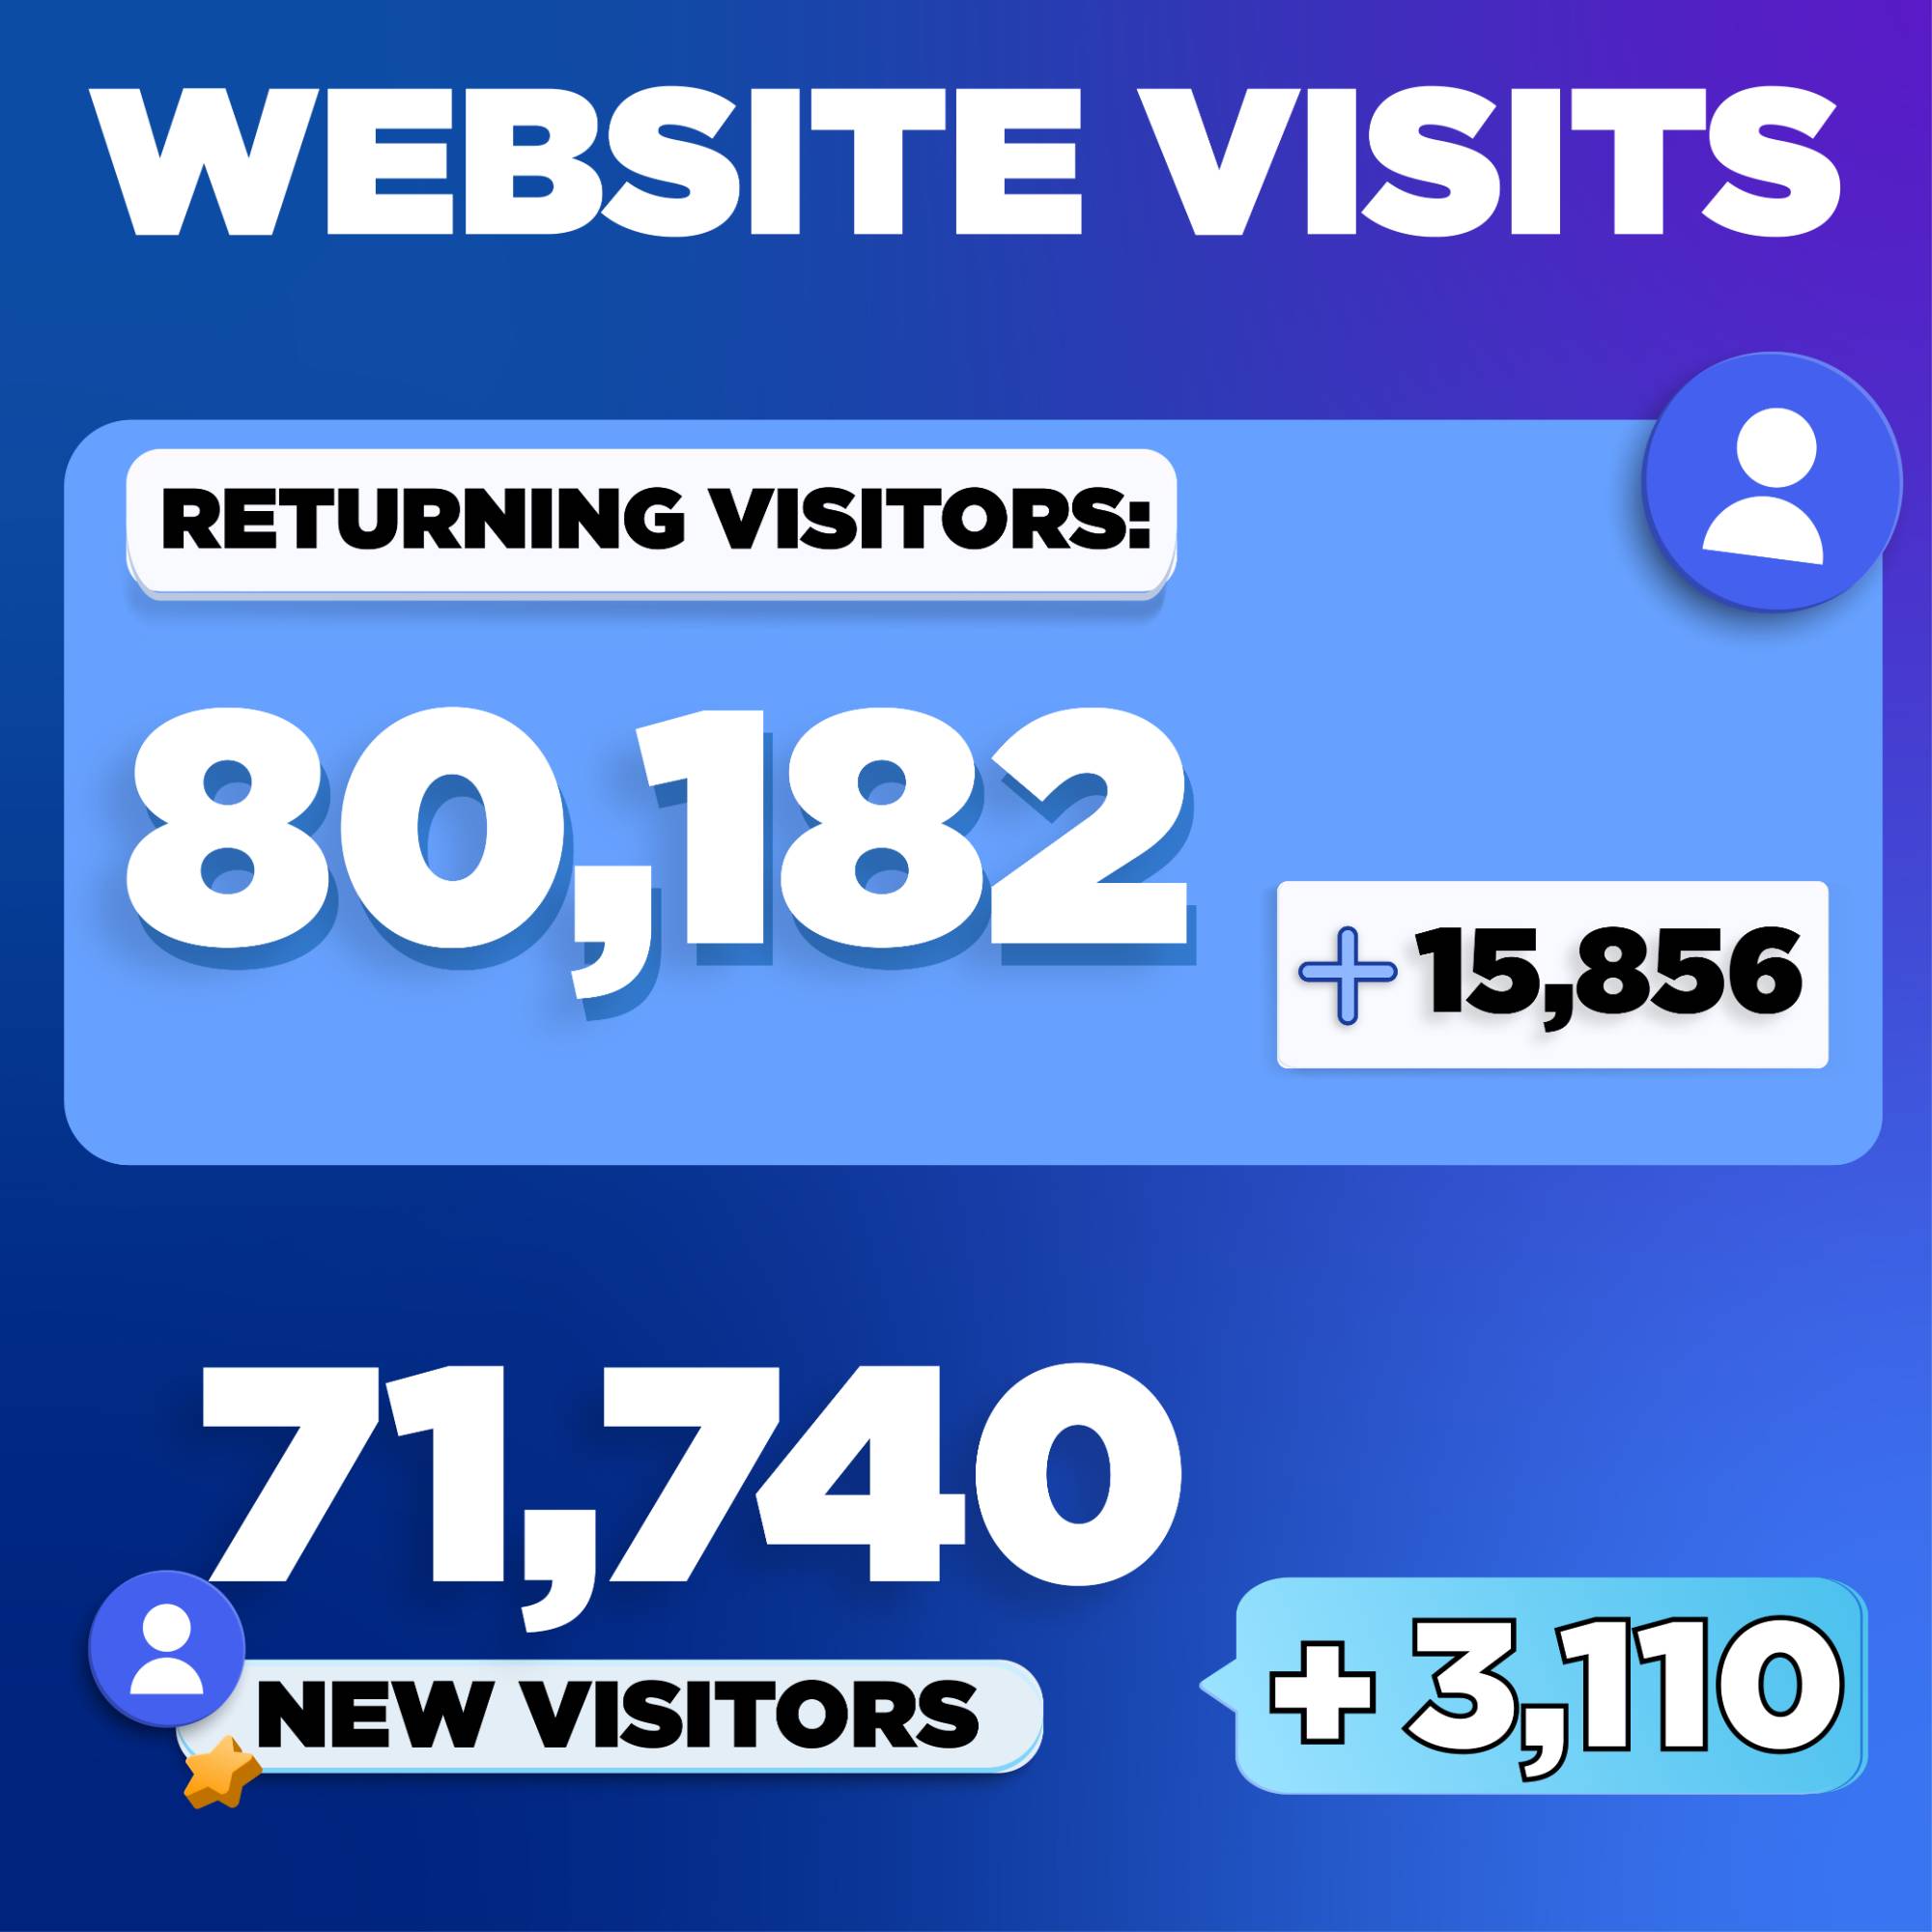 Website Visits: Our website received a total of 80,182 website visits from returning visitors. This number is up 15,856 from last year. We also received visits from 71,740 new visitors. This number is up 3,110 from last year.